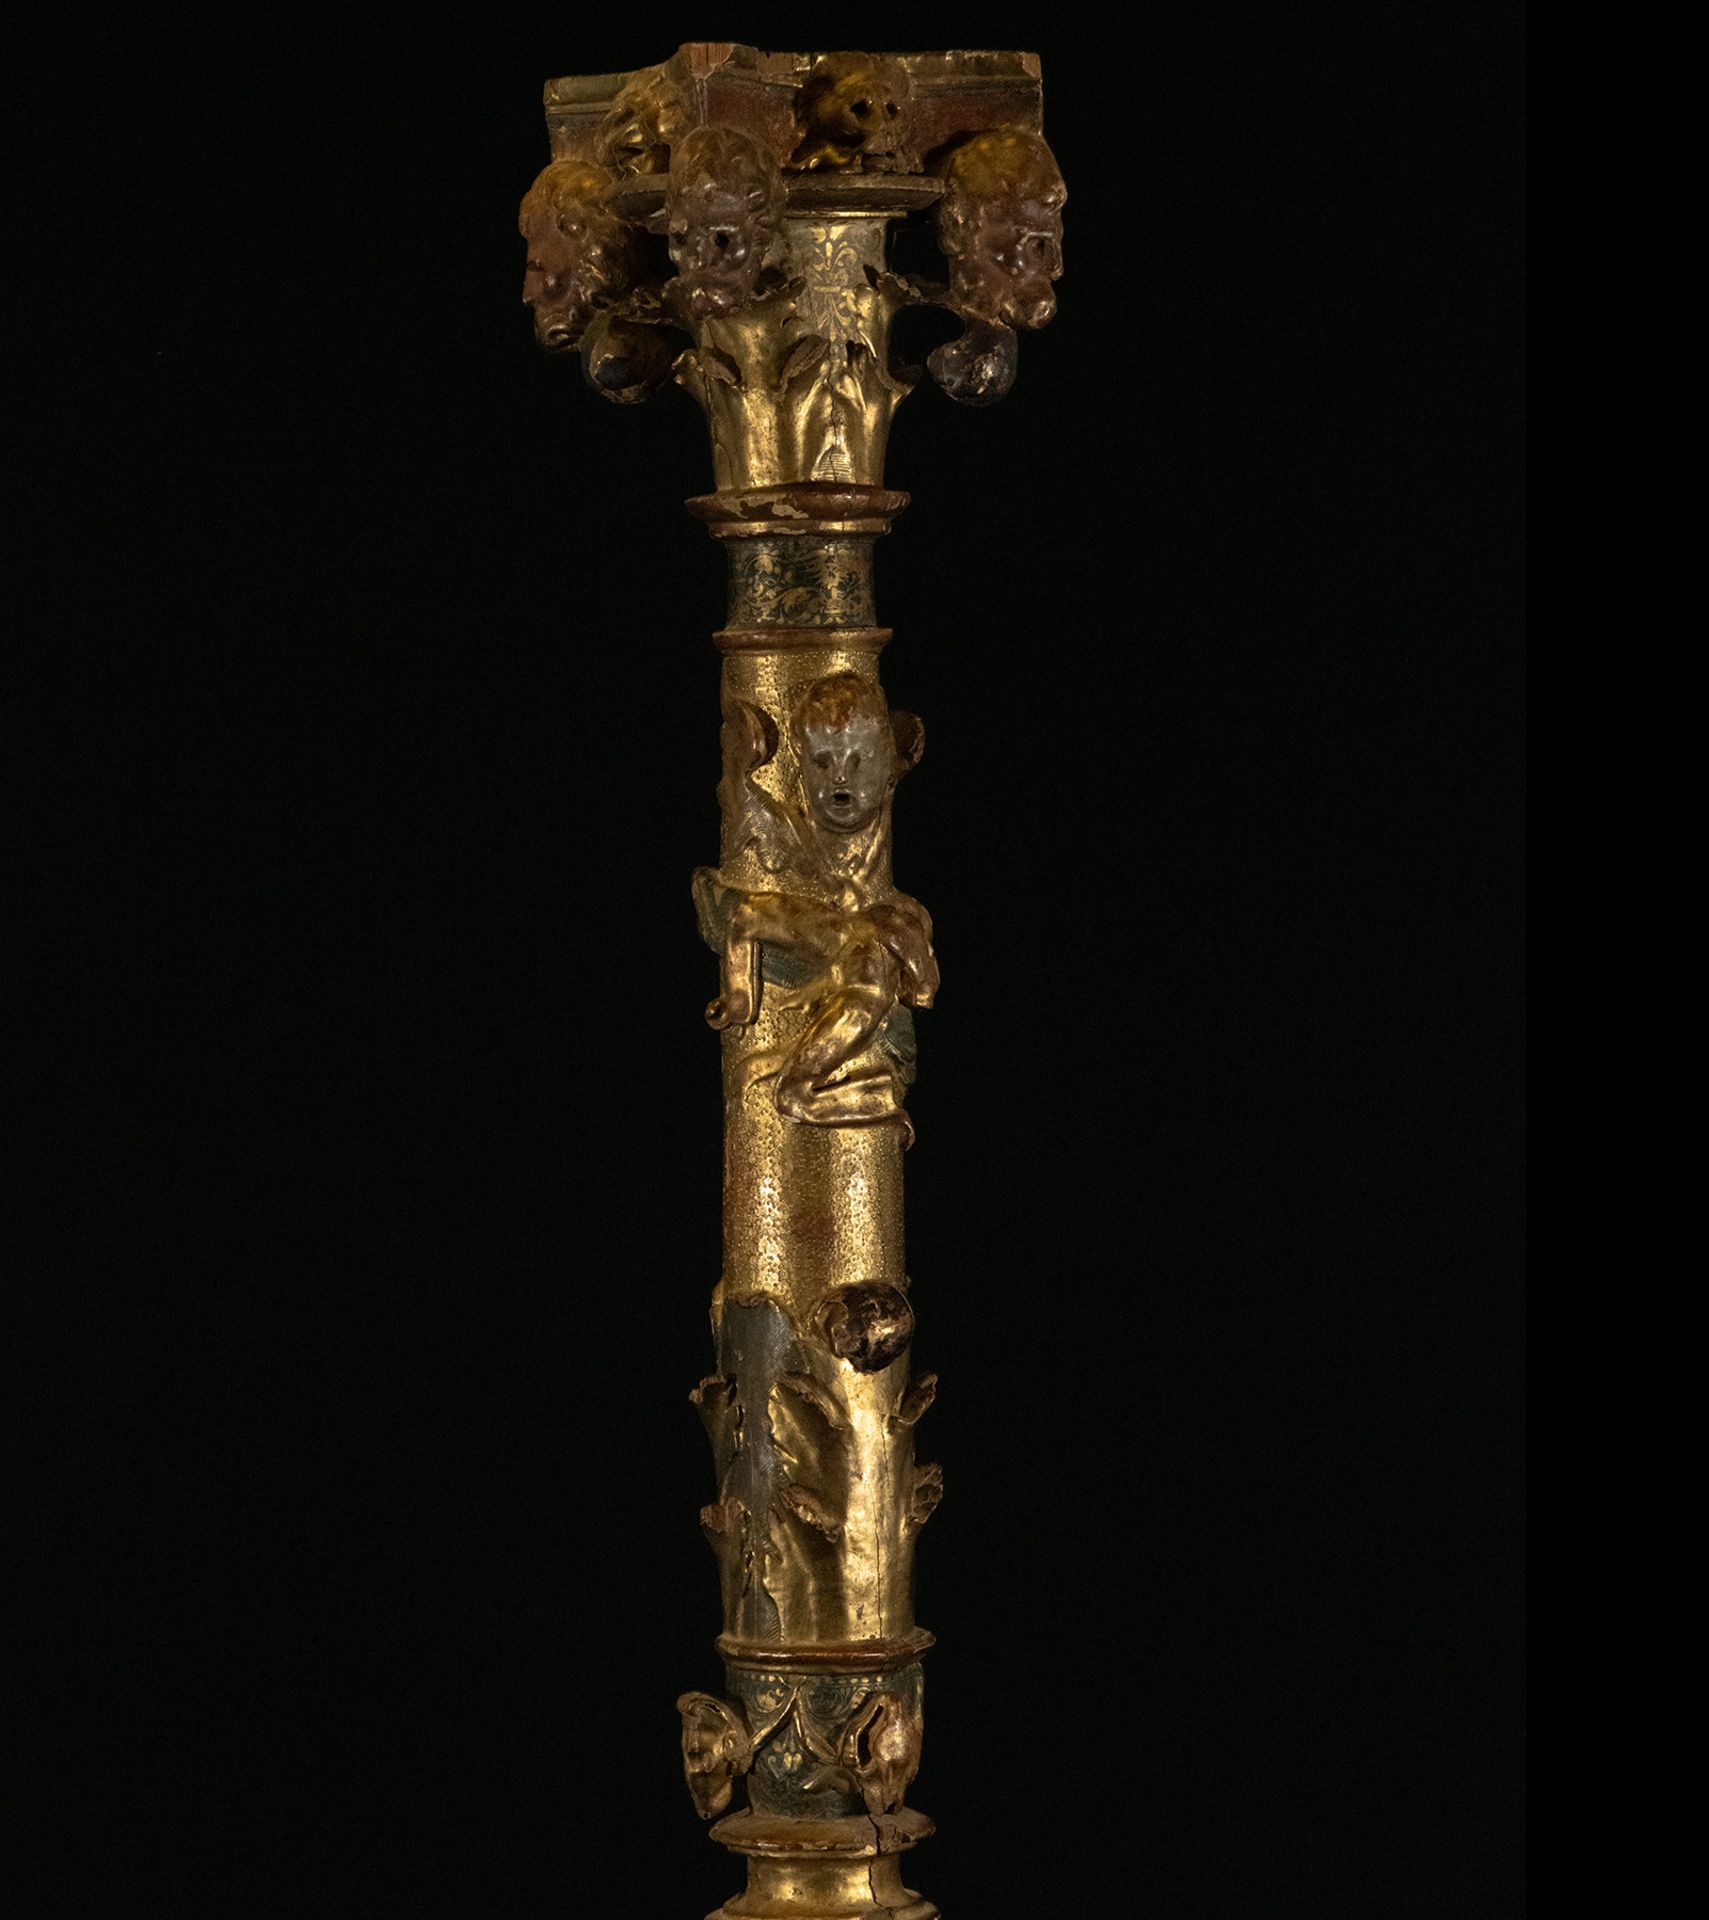 Pair of important Plateresque columns in carved and gilded wood, circle or workshop by Alonso Berrug - Image 3 of 9